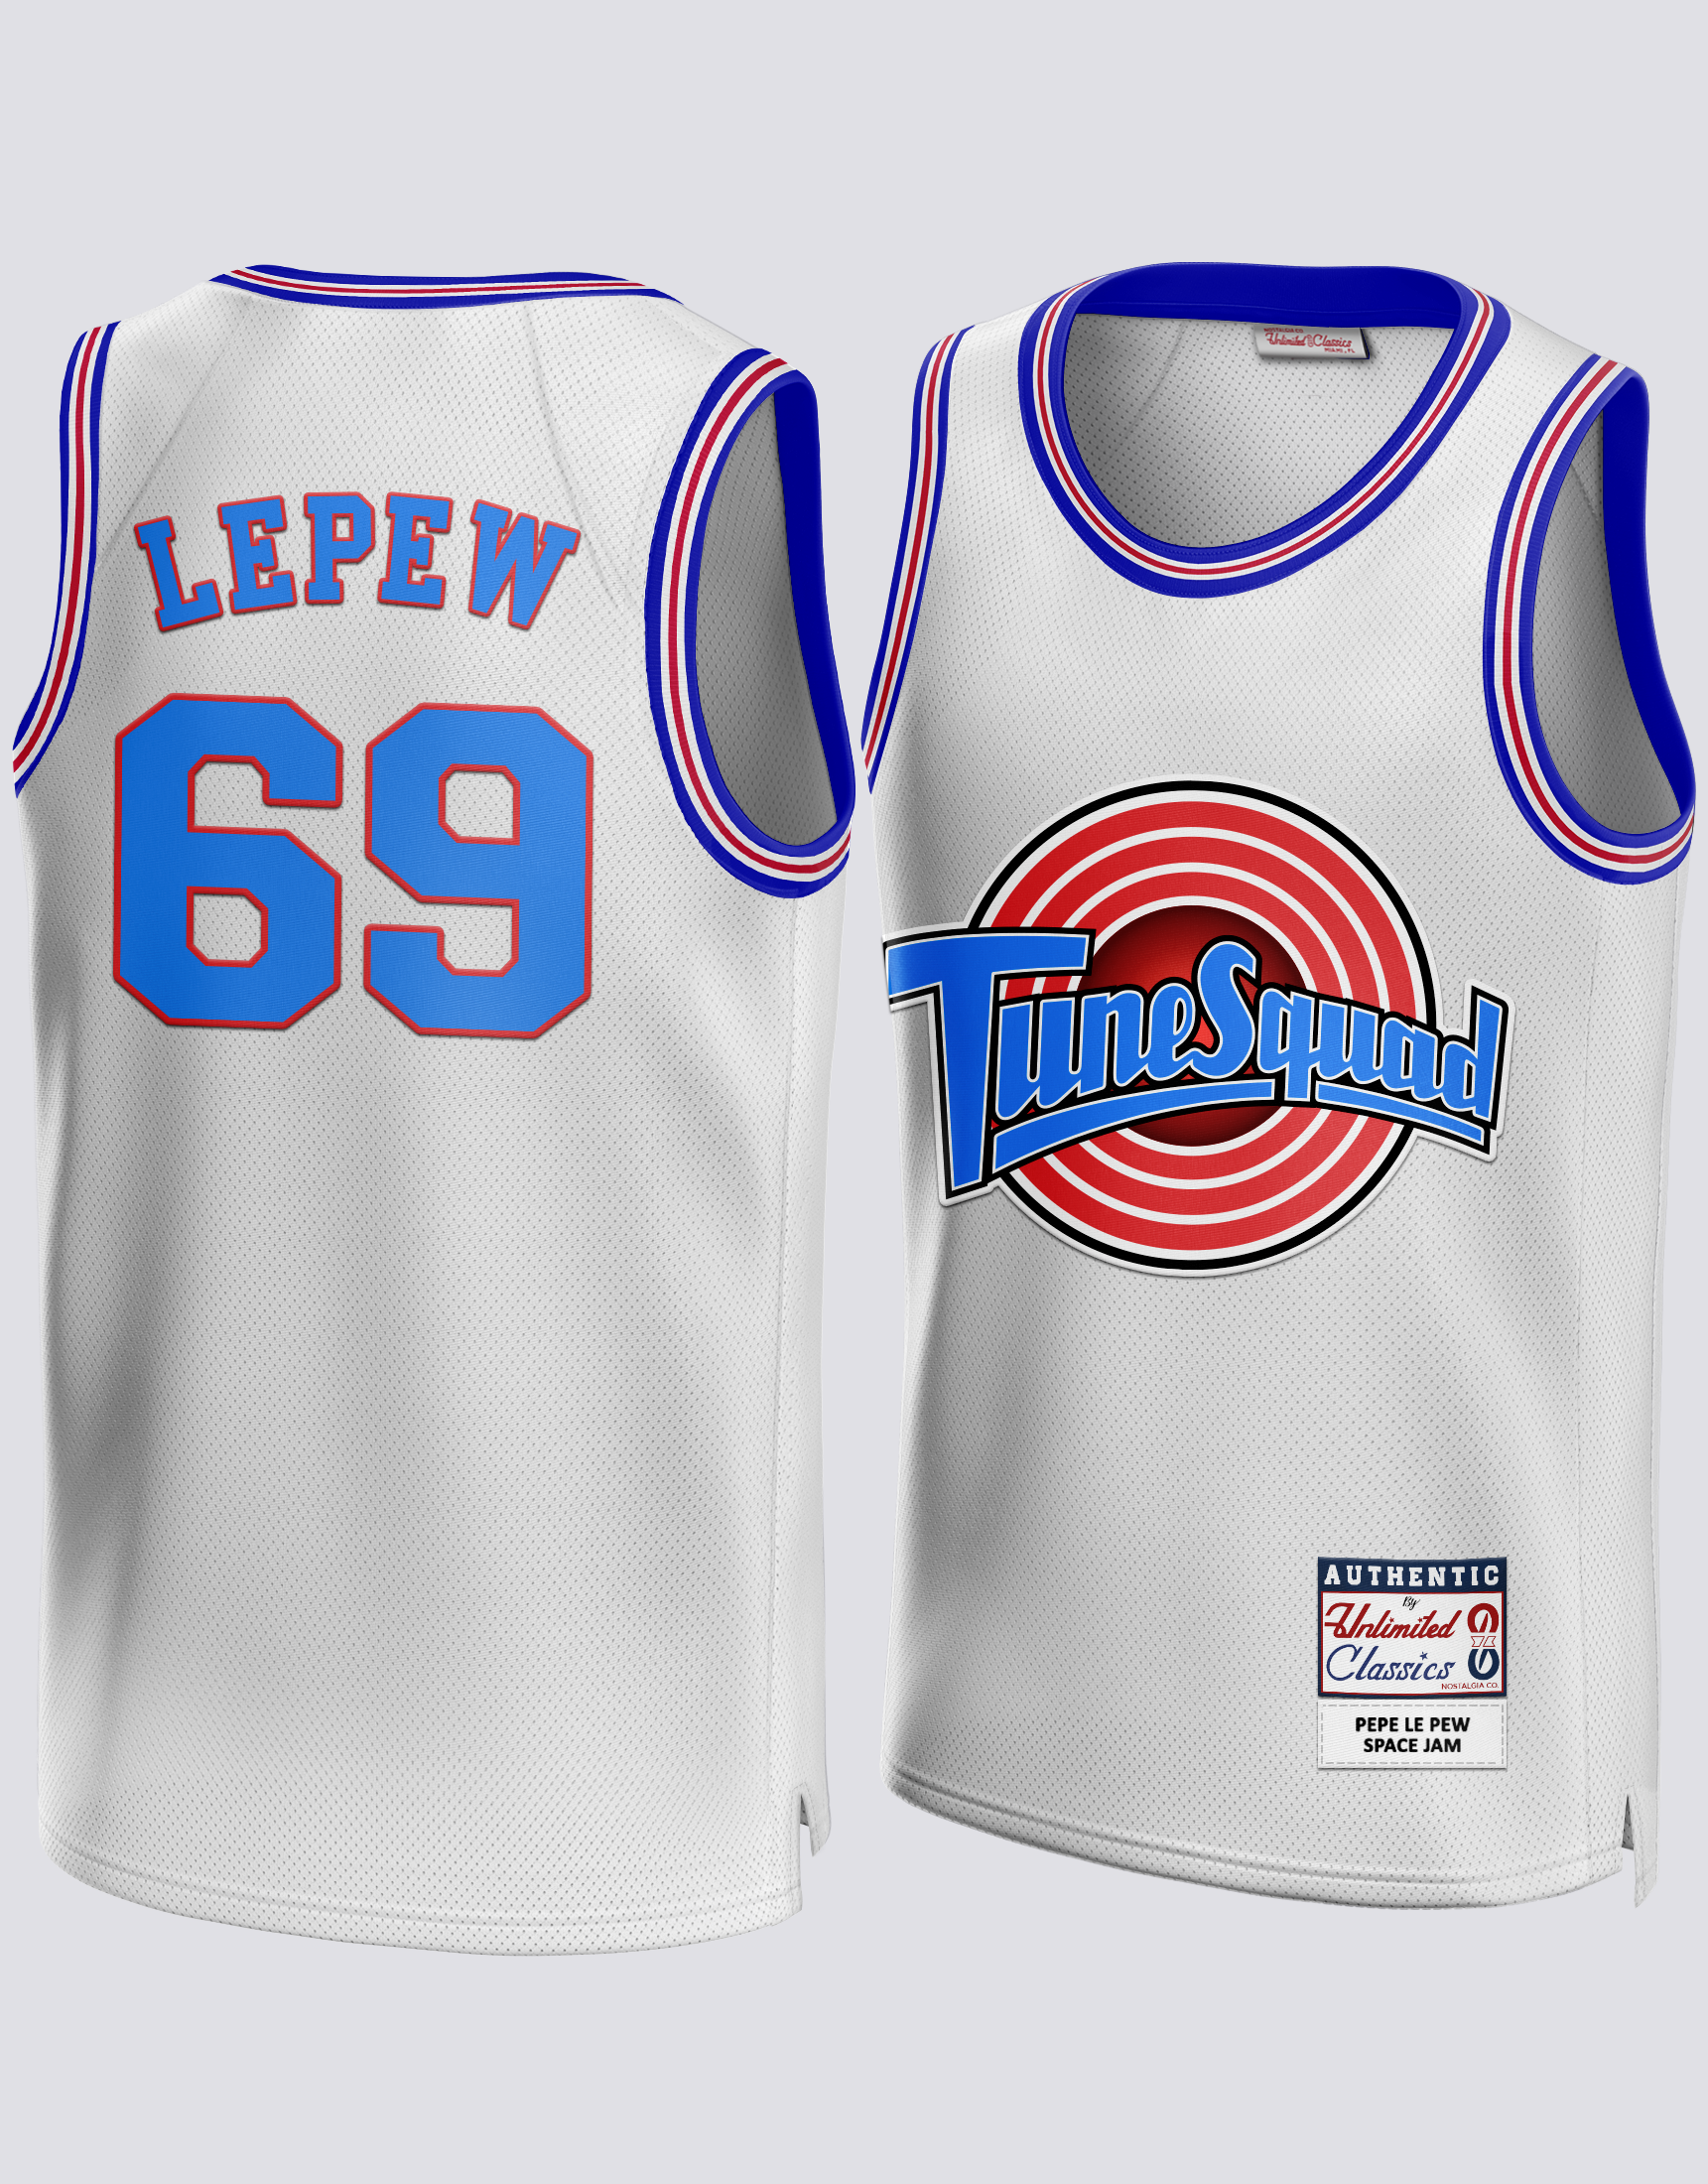 Pepe Le Pew #69 Space Jam Tune Squad Jersey